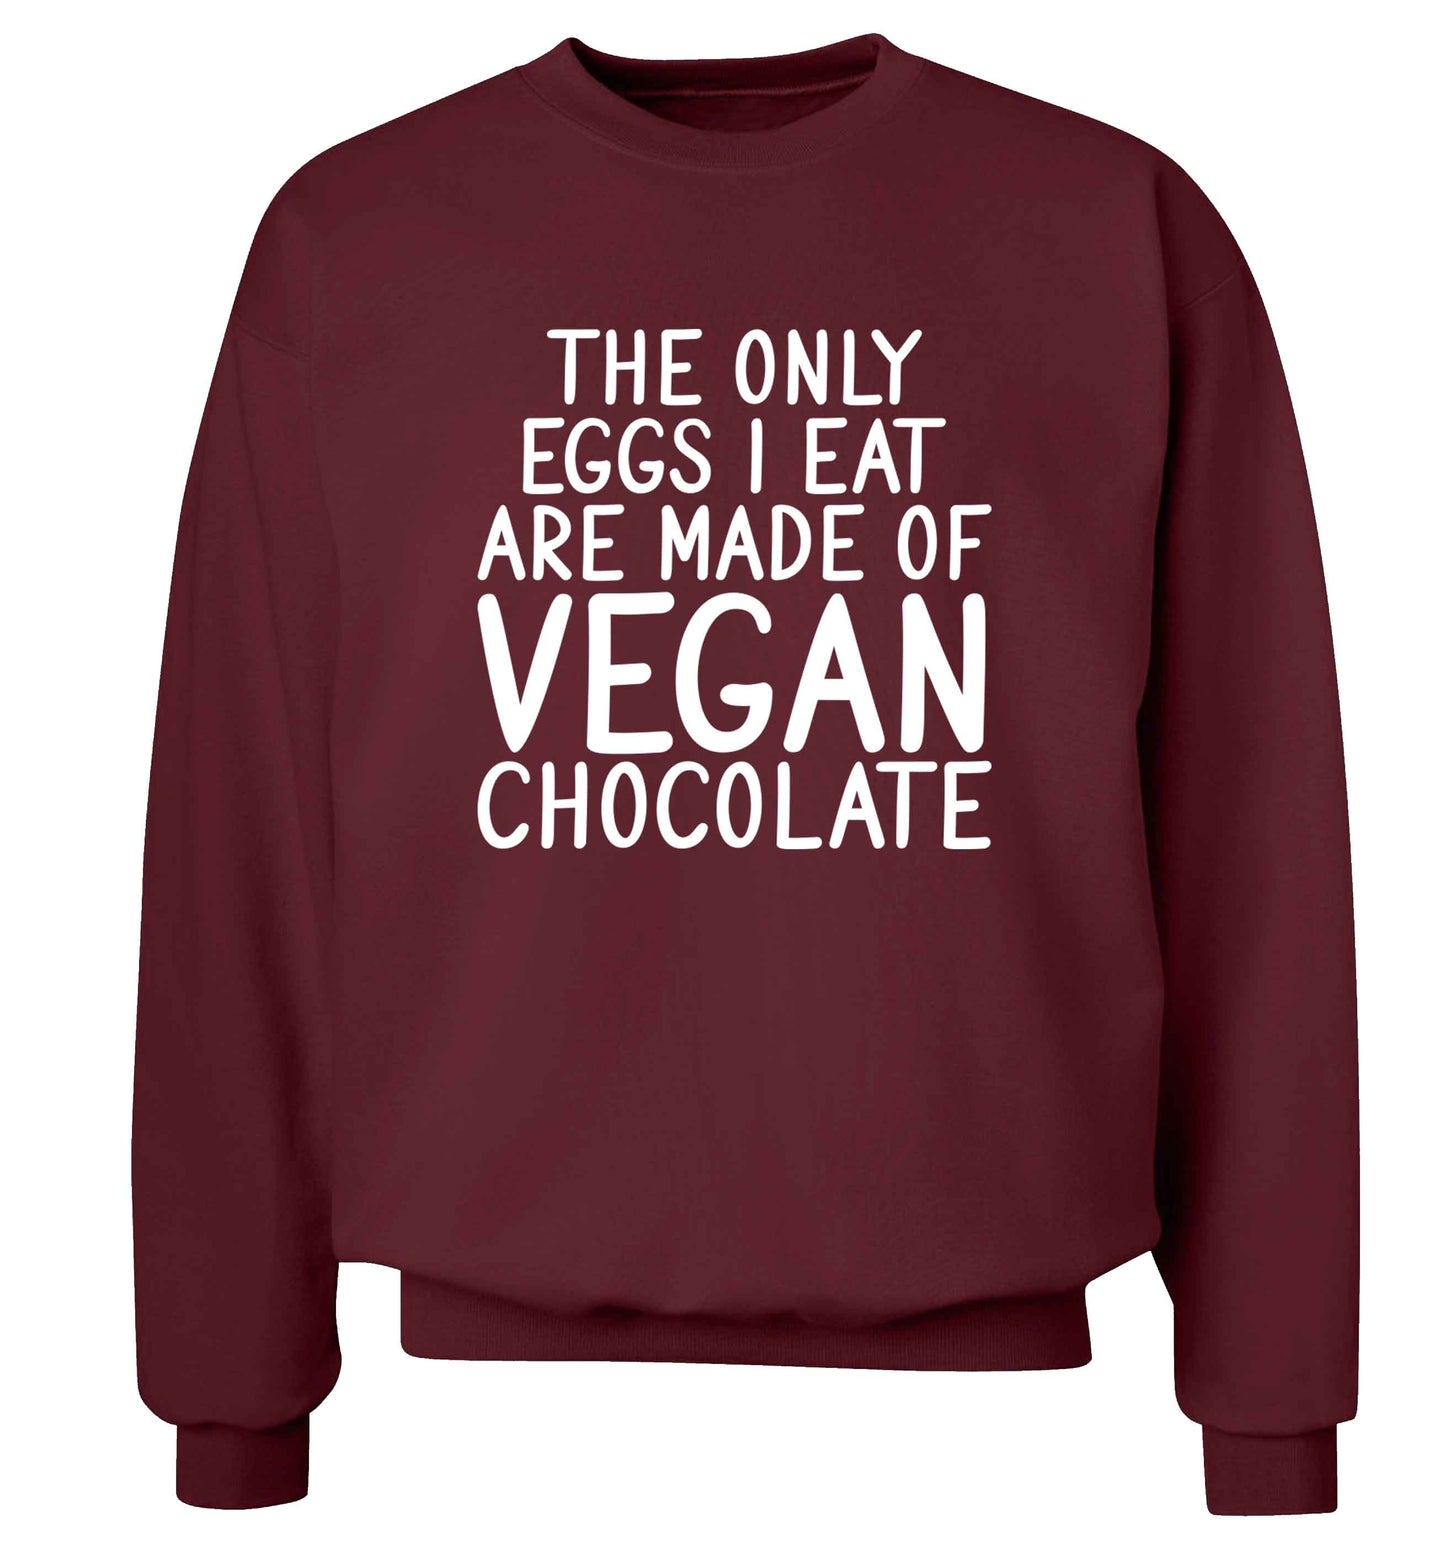 The only eggs I eat are made of vegan chocolate adult's unisex maroon sweater 2XL